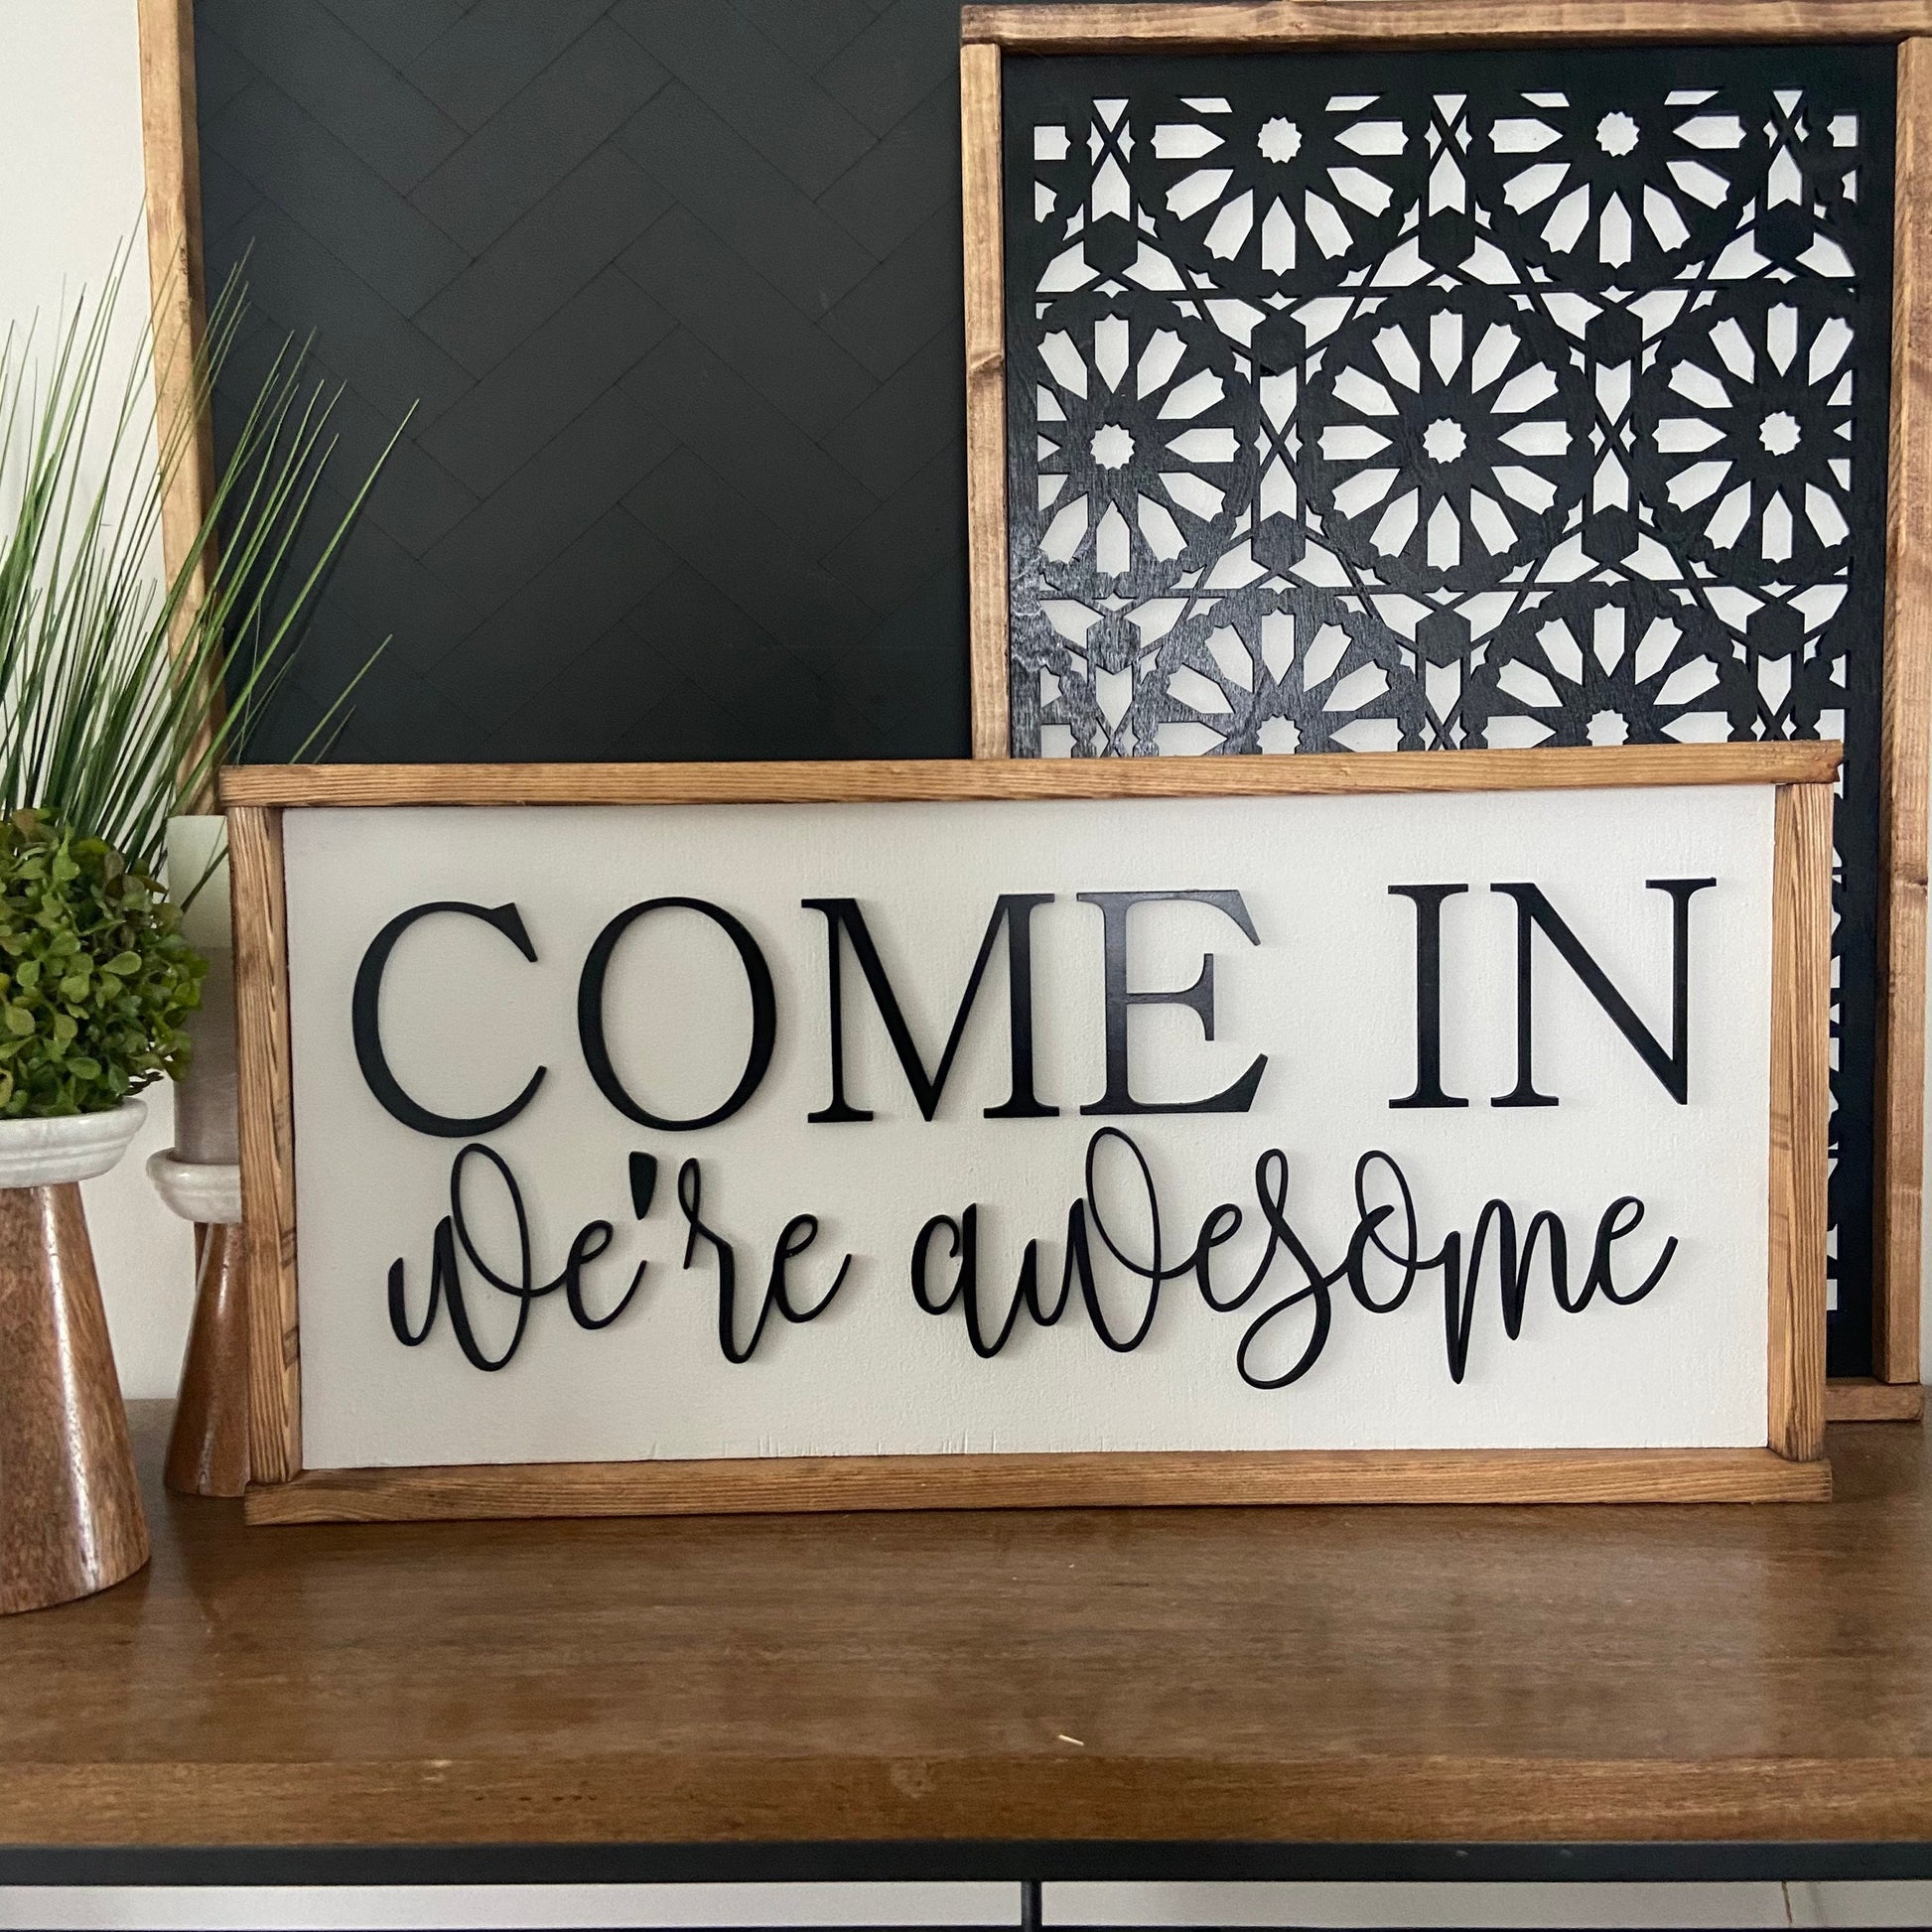 come in we’re awesome - entryway, porch sign [FREE SHIPPING!]